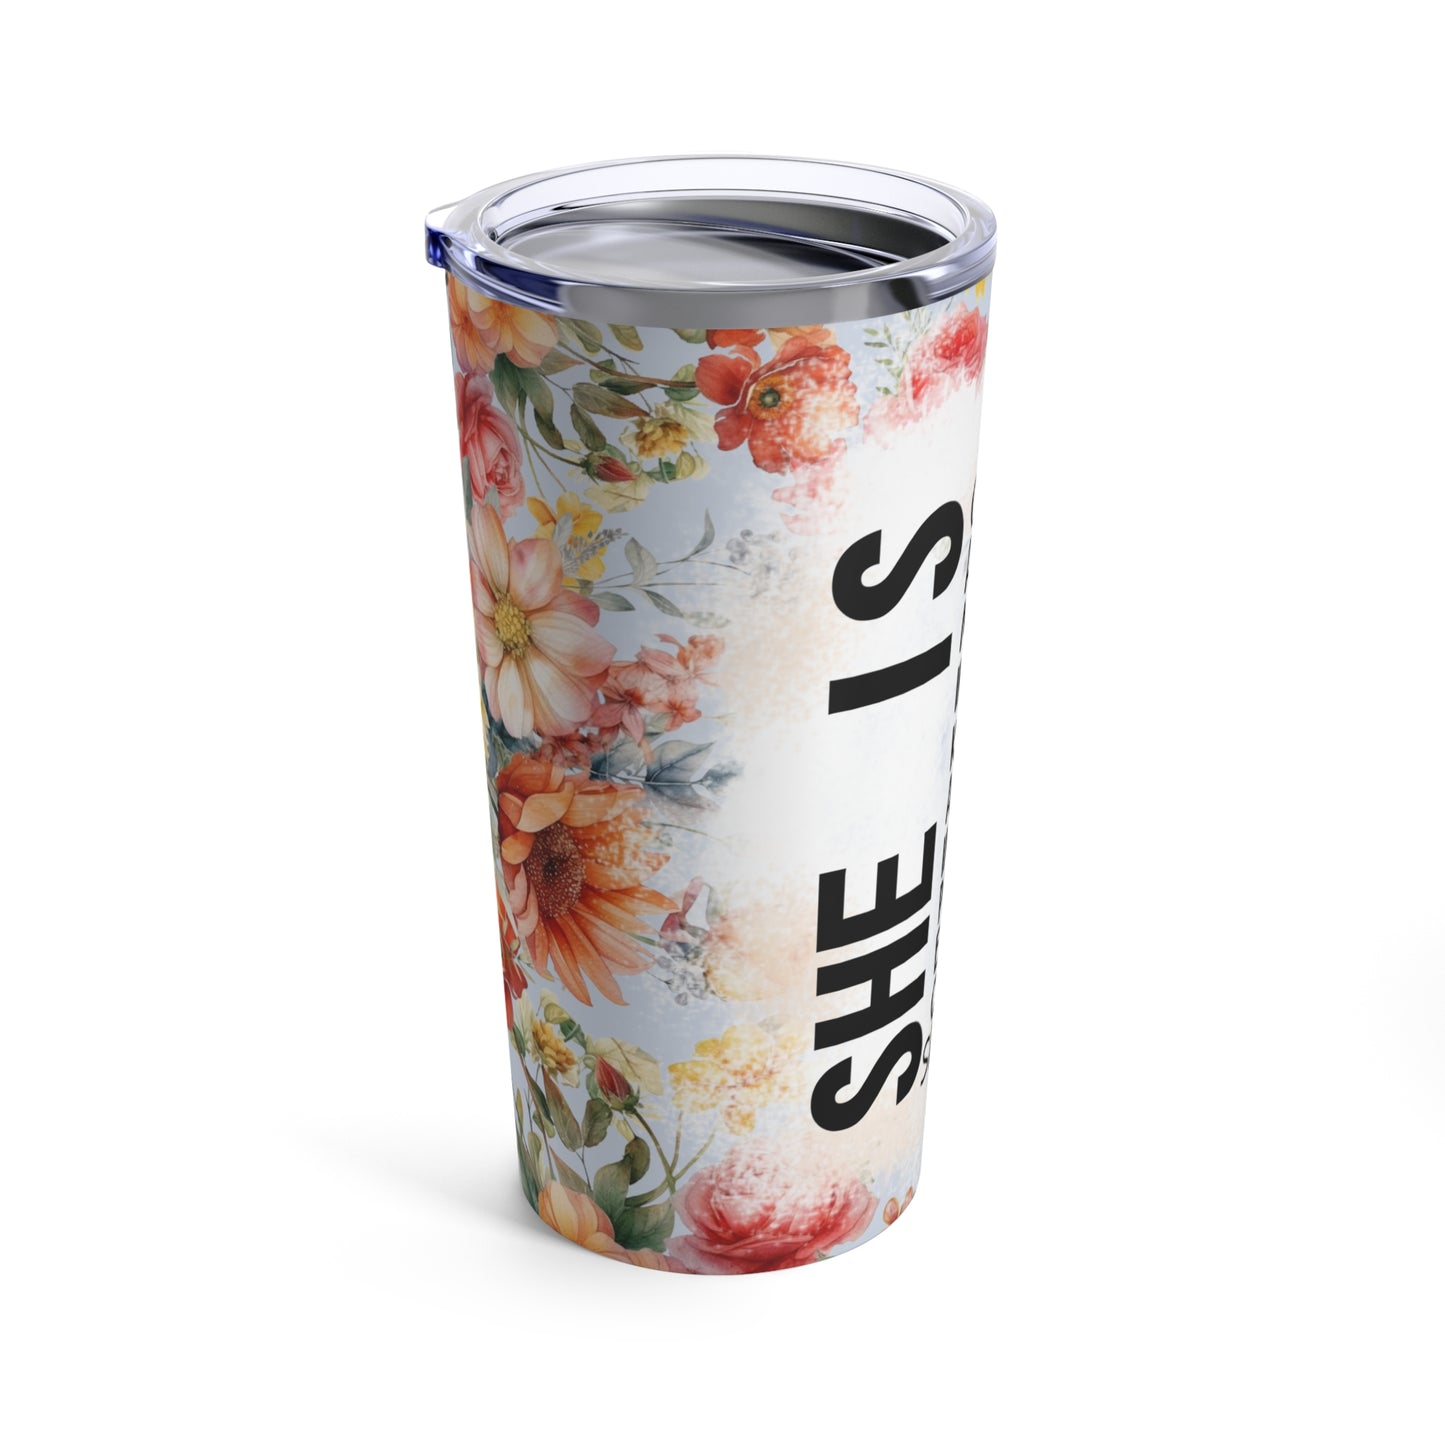 She is design #6, Mother's Day Gift, Wife, Sister, Significant Other, Girlfriend, Grandmother, Gift, Stainless Steel Tumbler 20oz